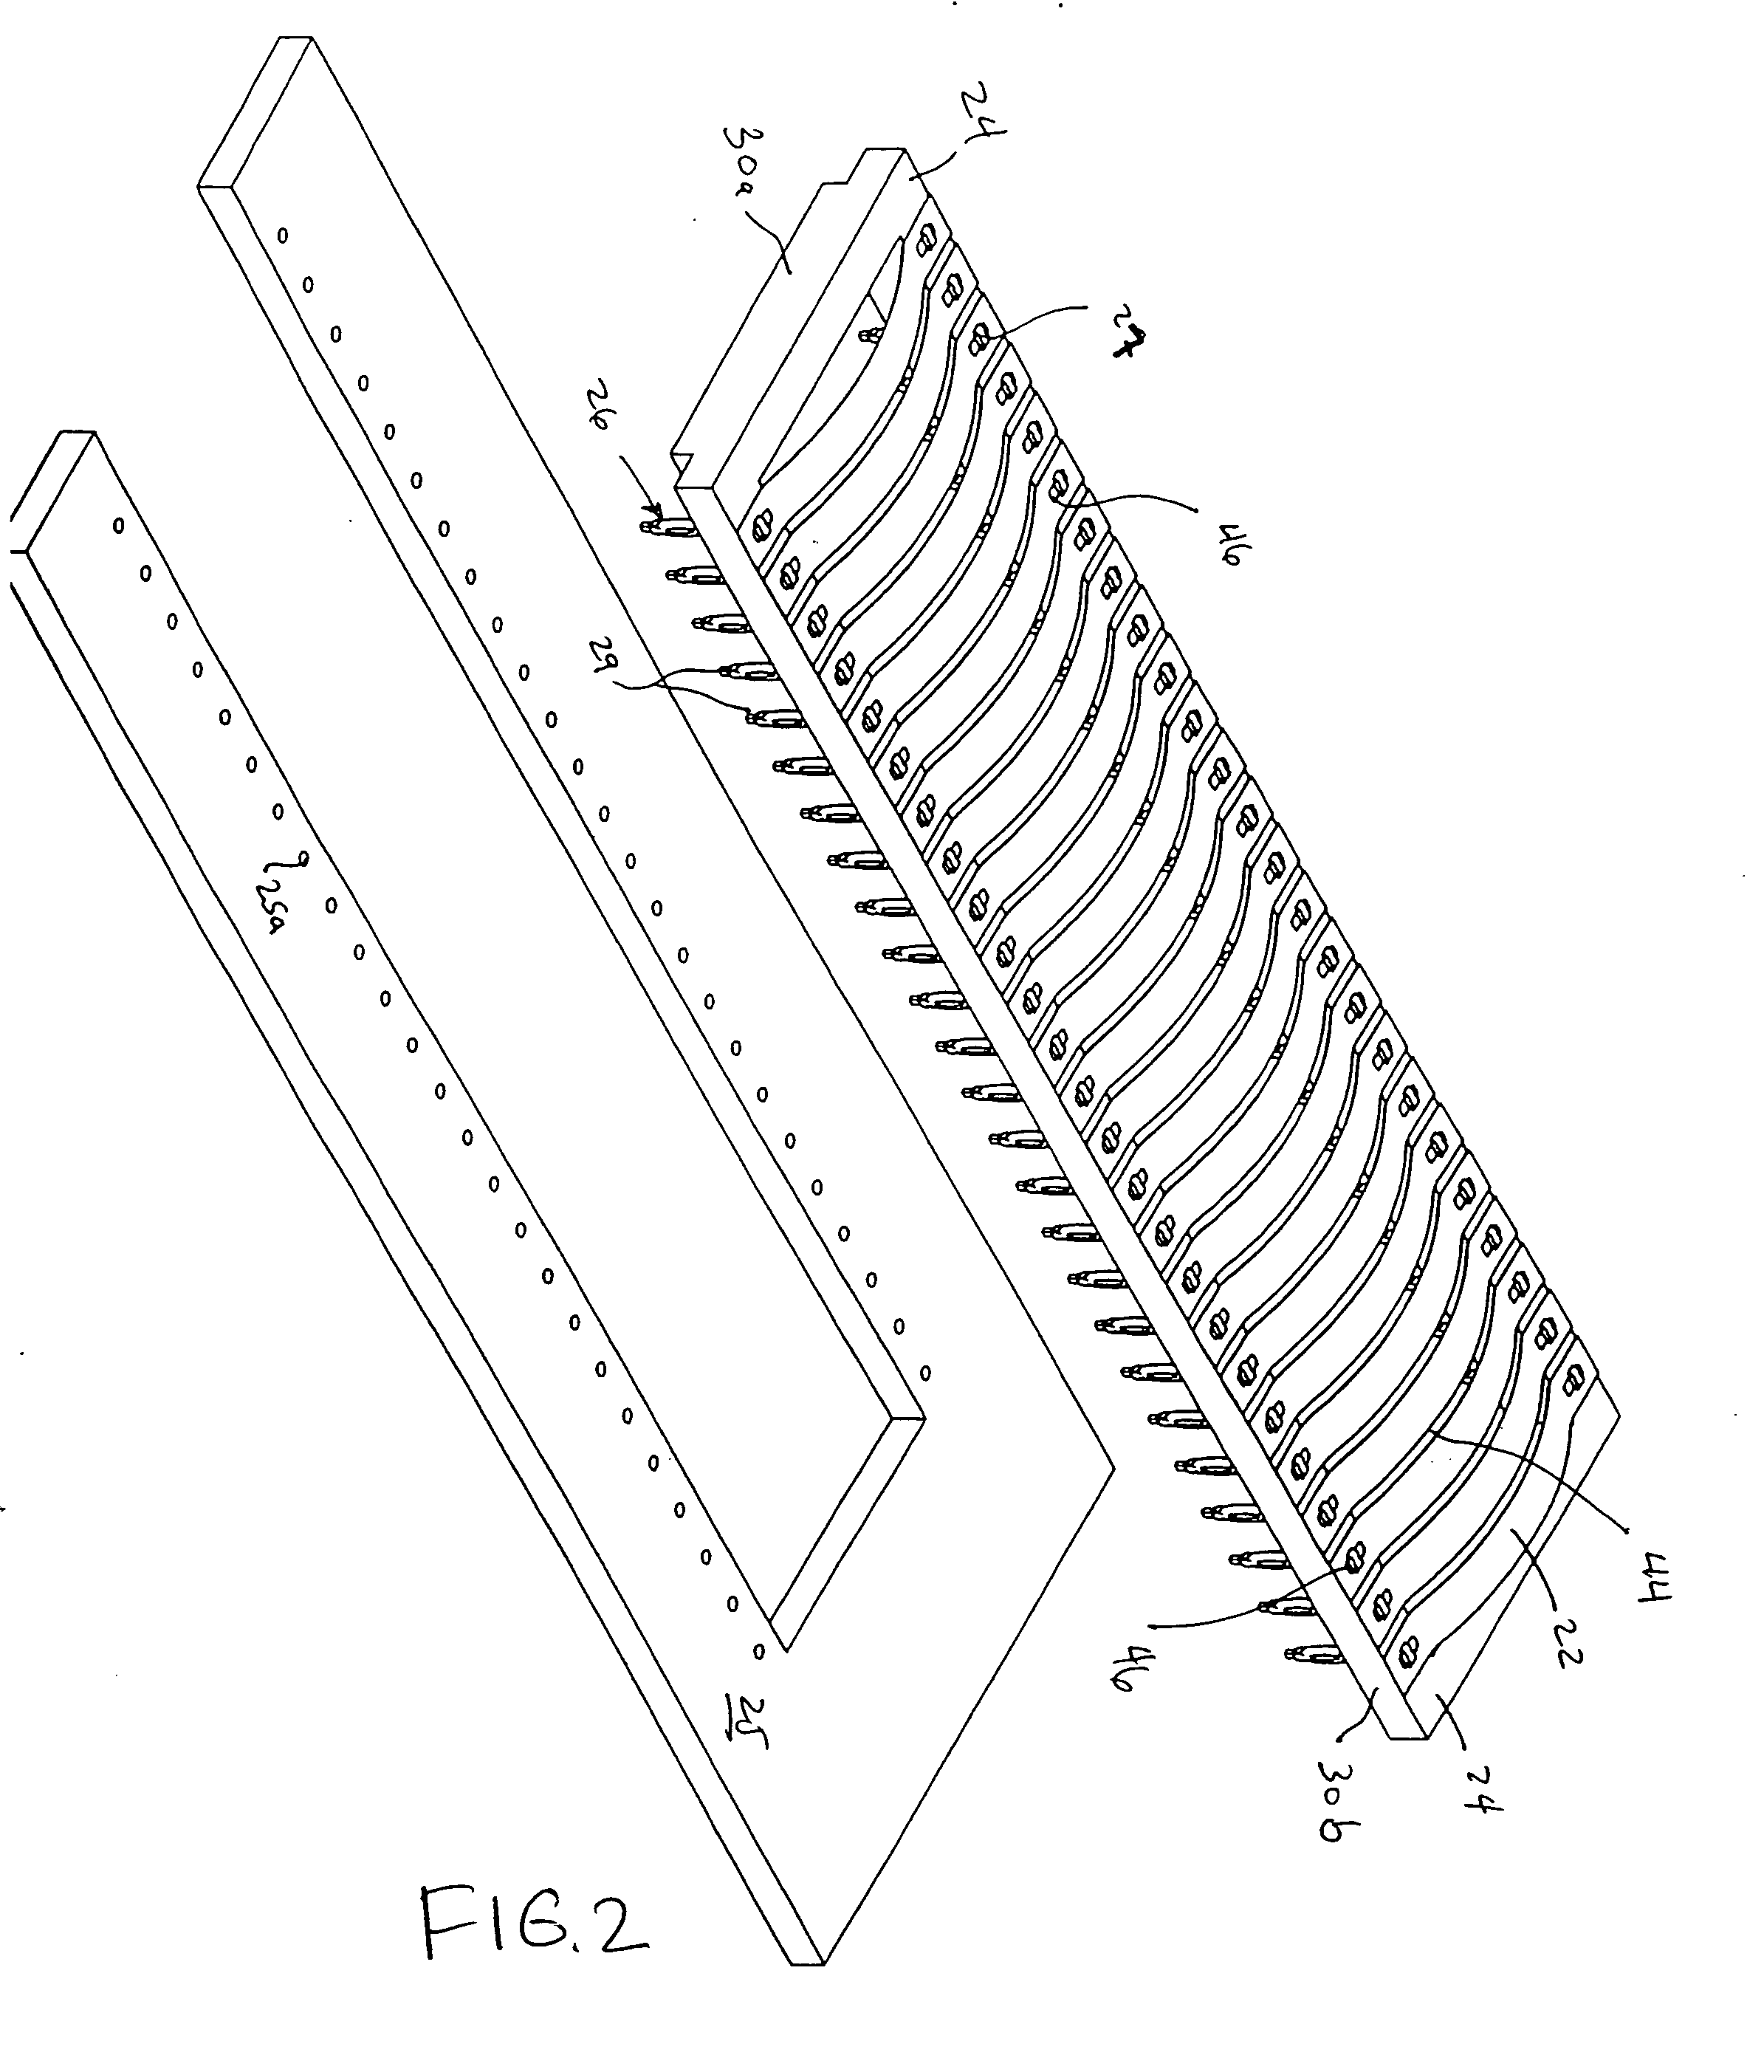 Heating element connector assembly with press-fit terminals